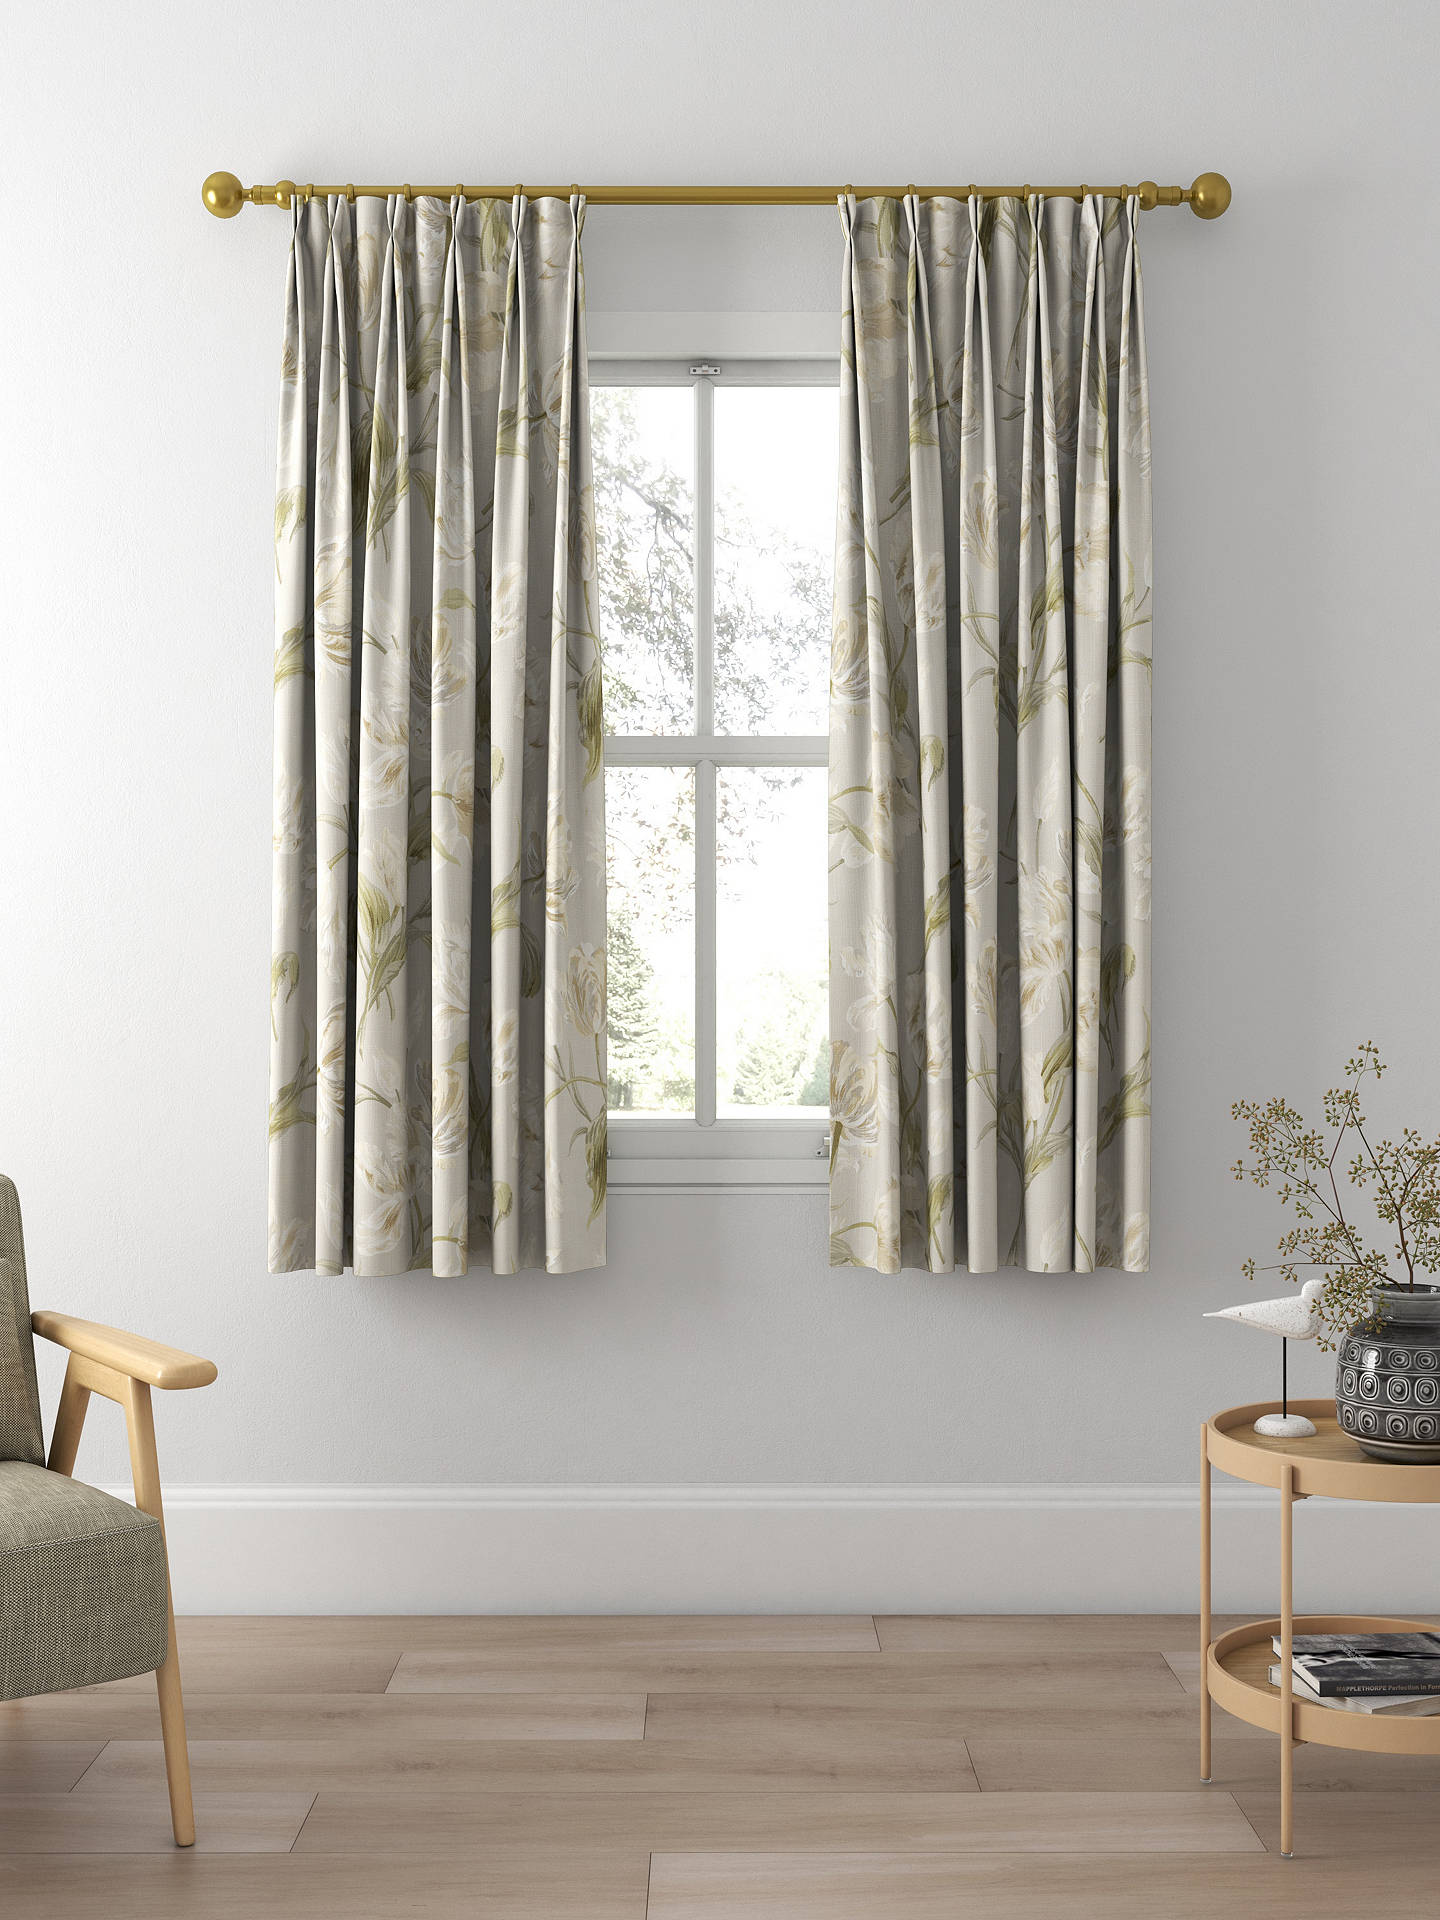 Laura Ashley Gosford Meadow Made to Measure Curtains, Sage